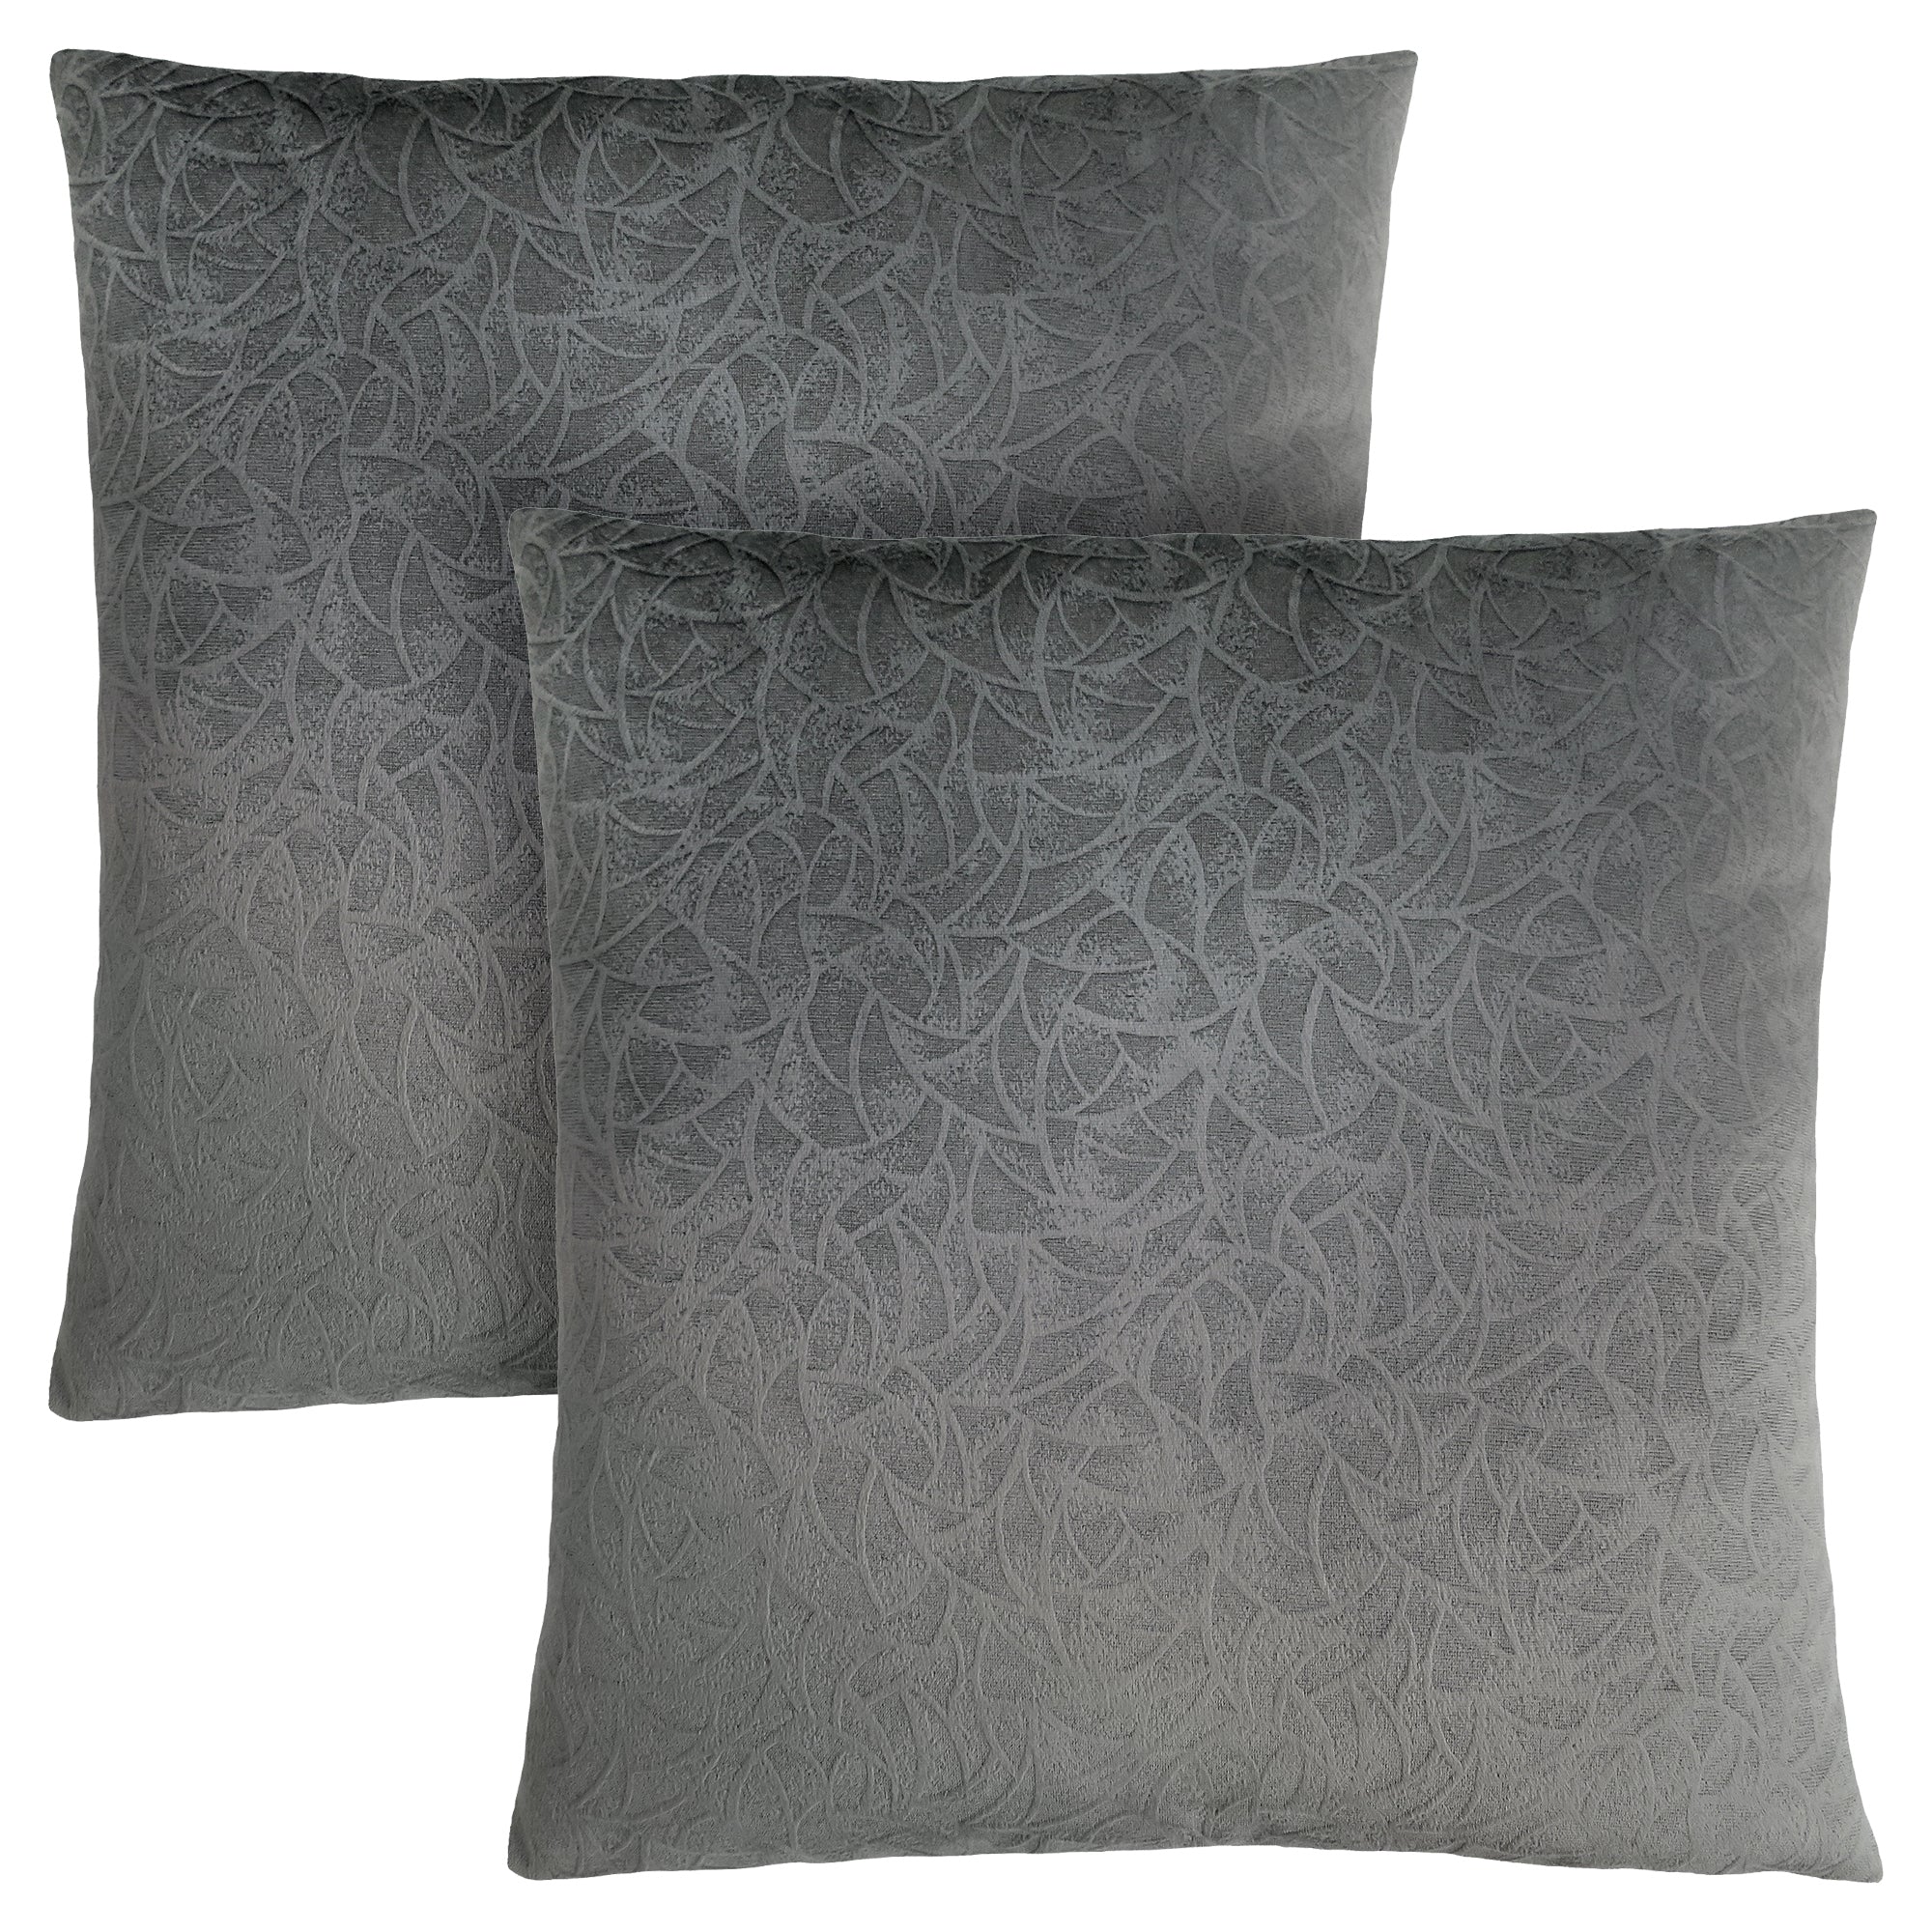 MN-609259    Pillows, Set Of 2, 18 X 18 Square, Insert Included, Decorative Throw, Accent, Sofa, Couch, Bed, Soft Polyester Woven Fabric, Hypoallergenic Soft Polyester Insert, Dark Grey, Transitional